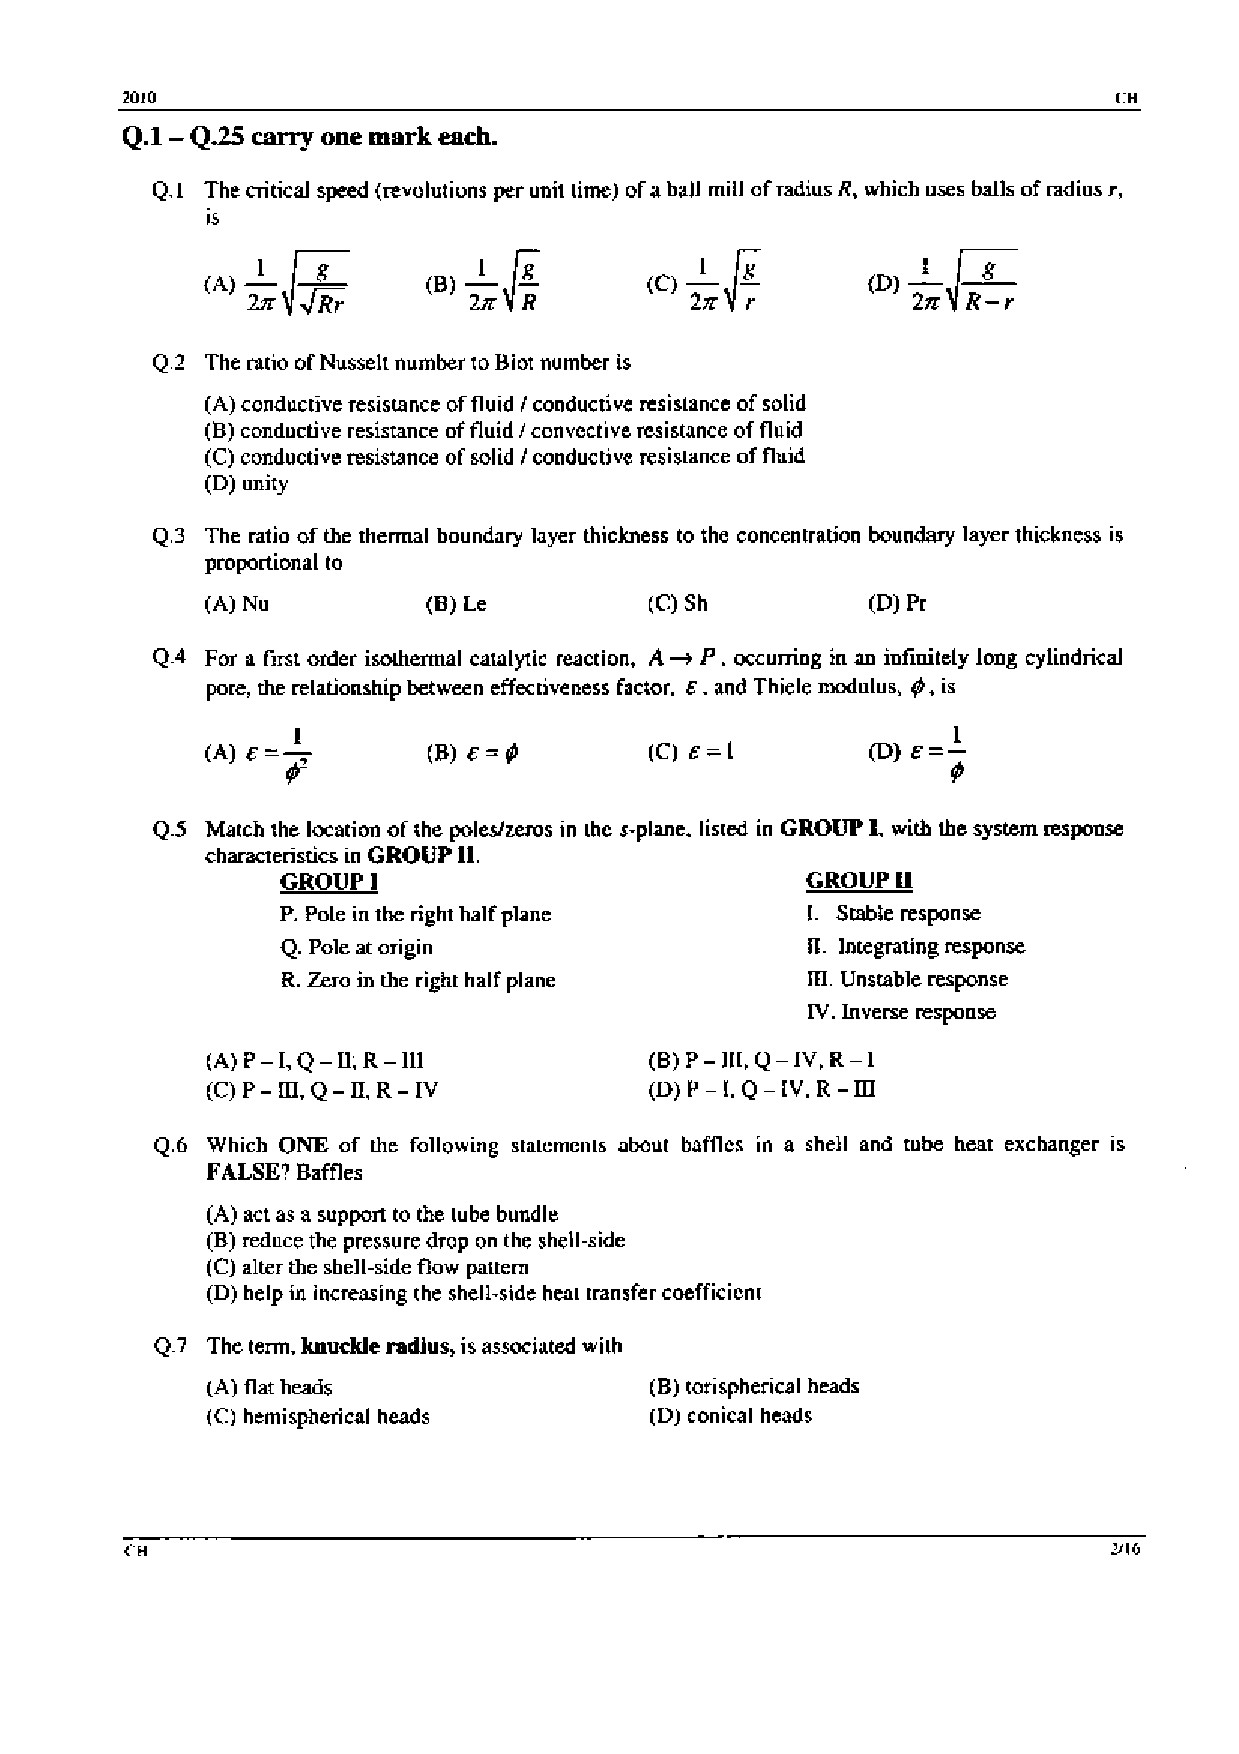 GATE Exam Question Paper 2010 Chemical Engineering 2